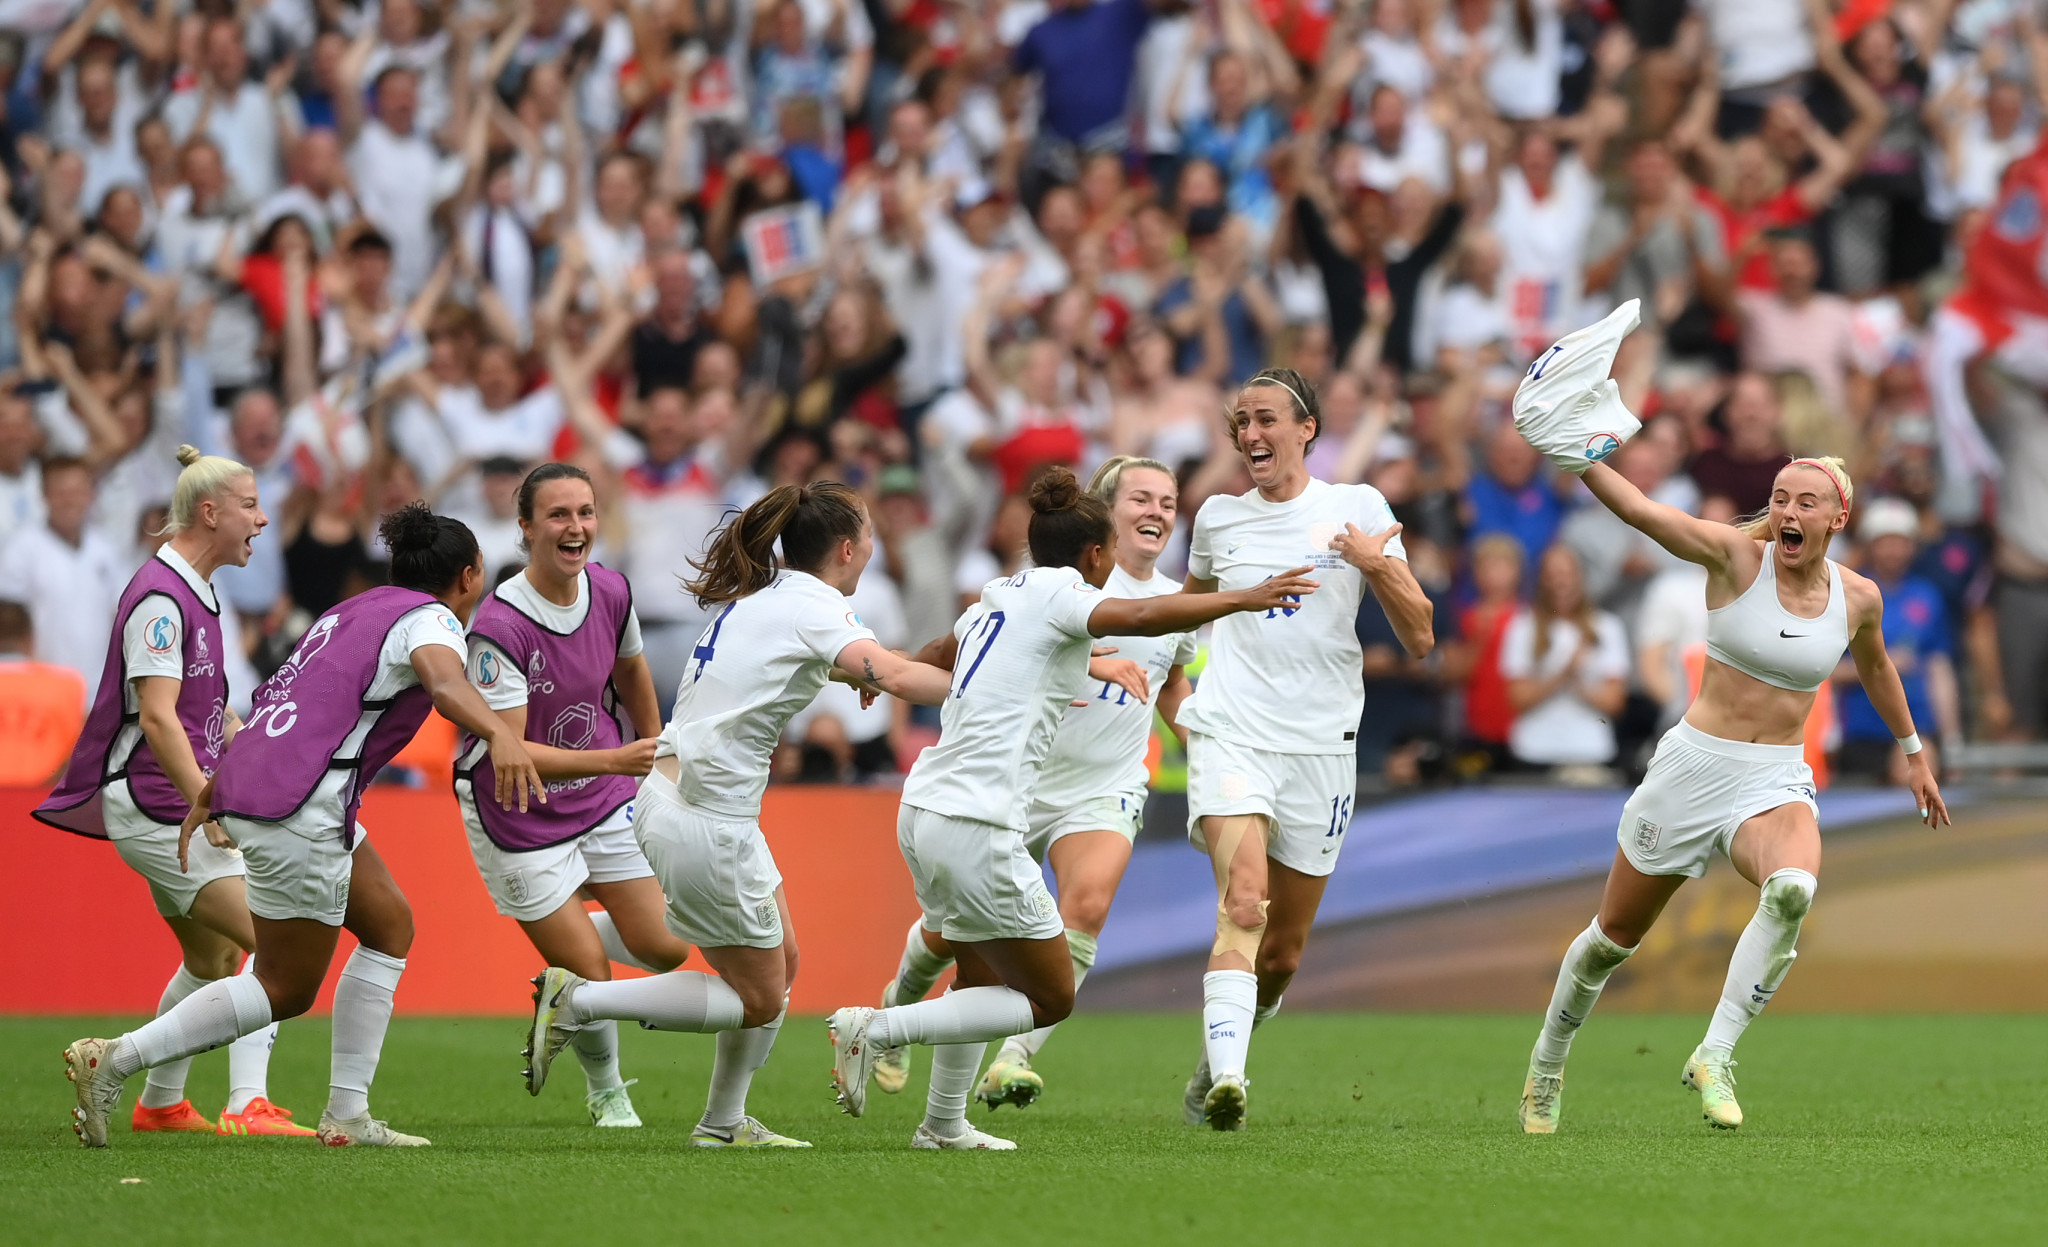 Chloe Kelly's iconic celebration after scoring the winner in the Women's Euro final against Germany is considered empowering ©Getty Images